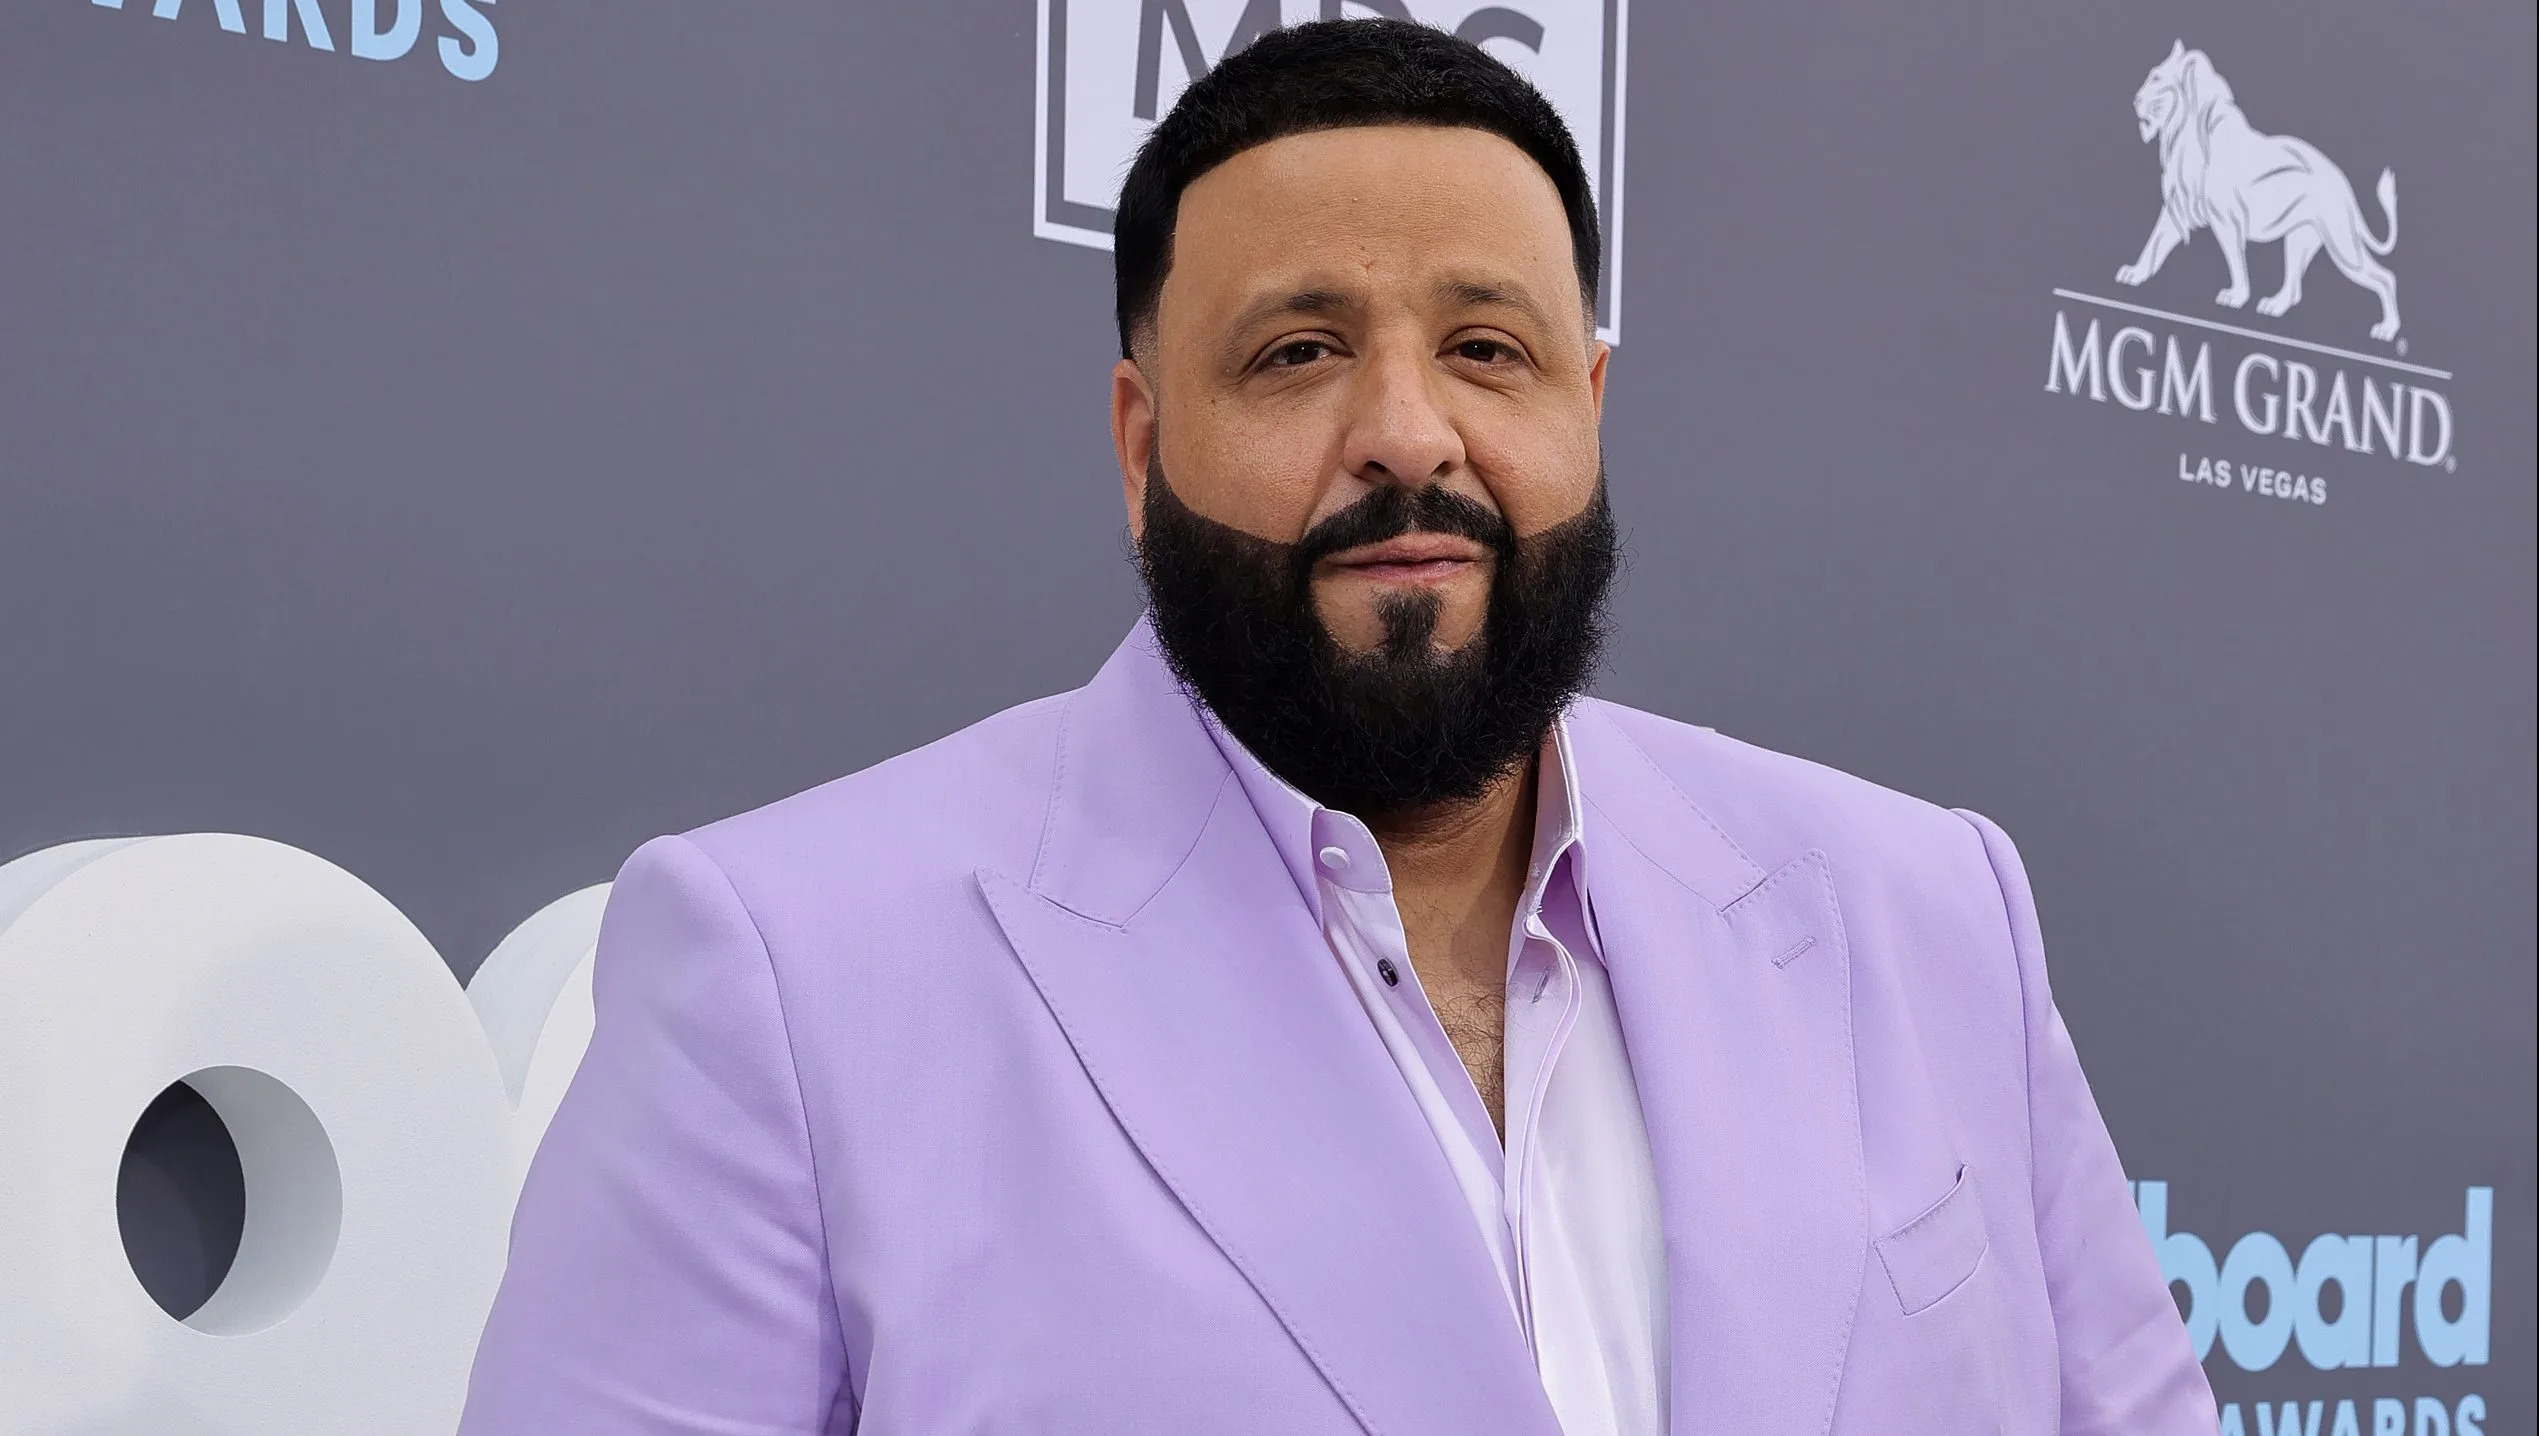 During The We The Best Press Conference, DJ Khaled Teases A Major Announcement